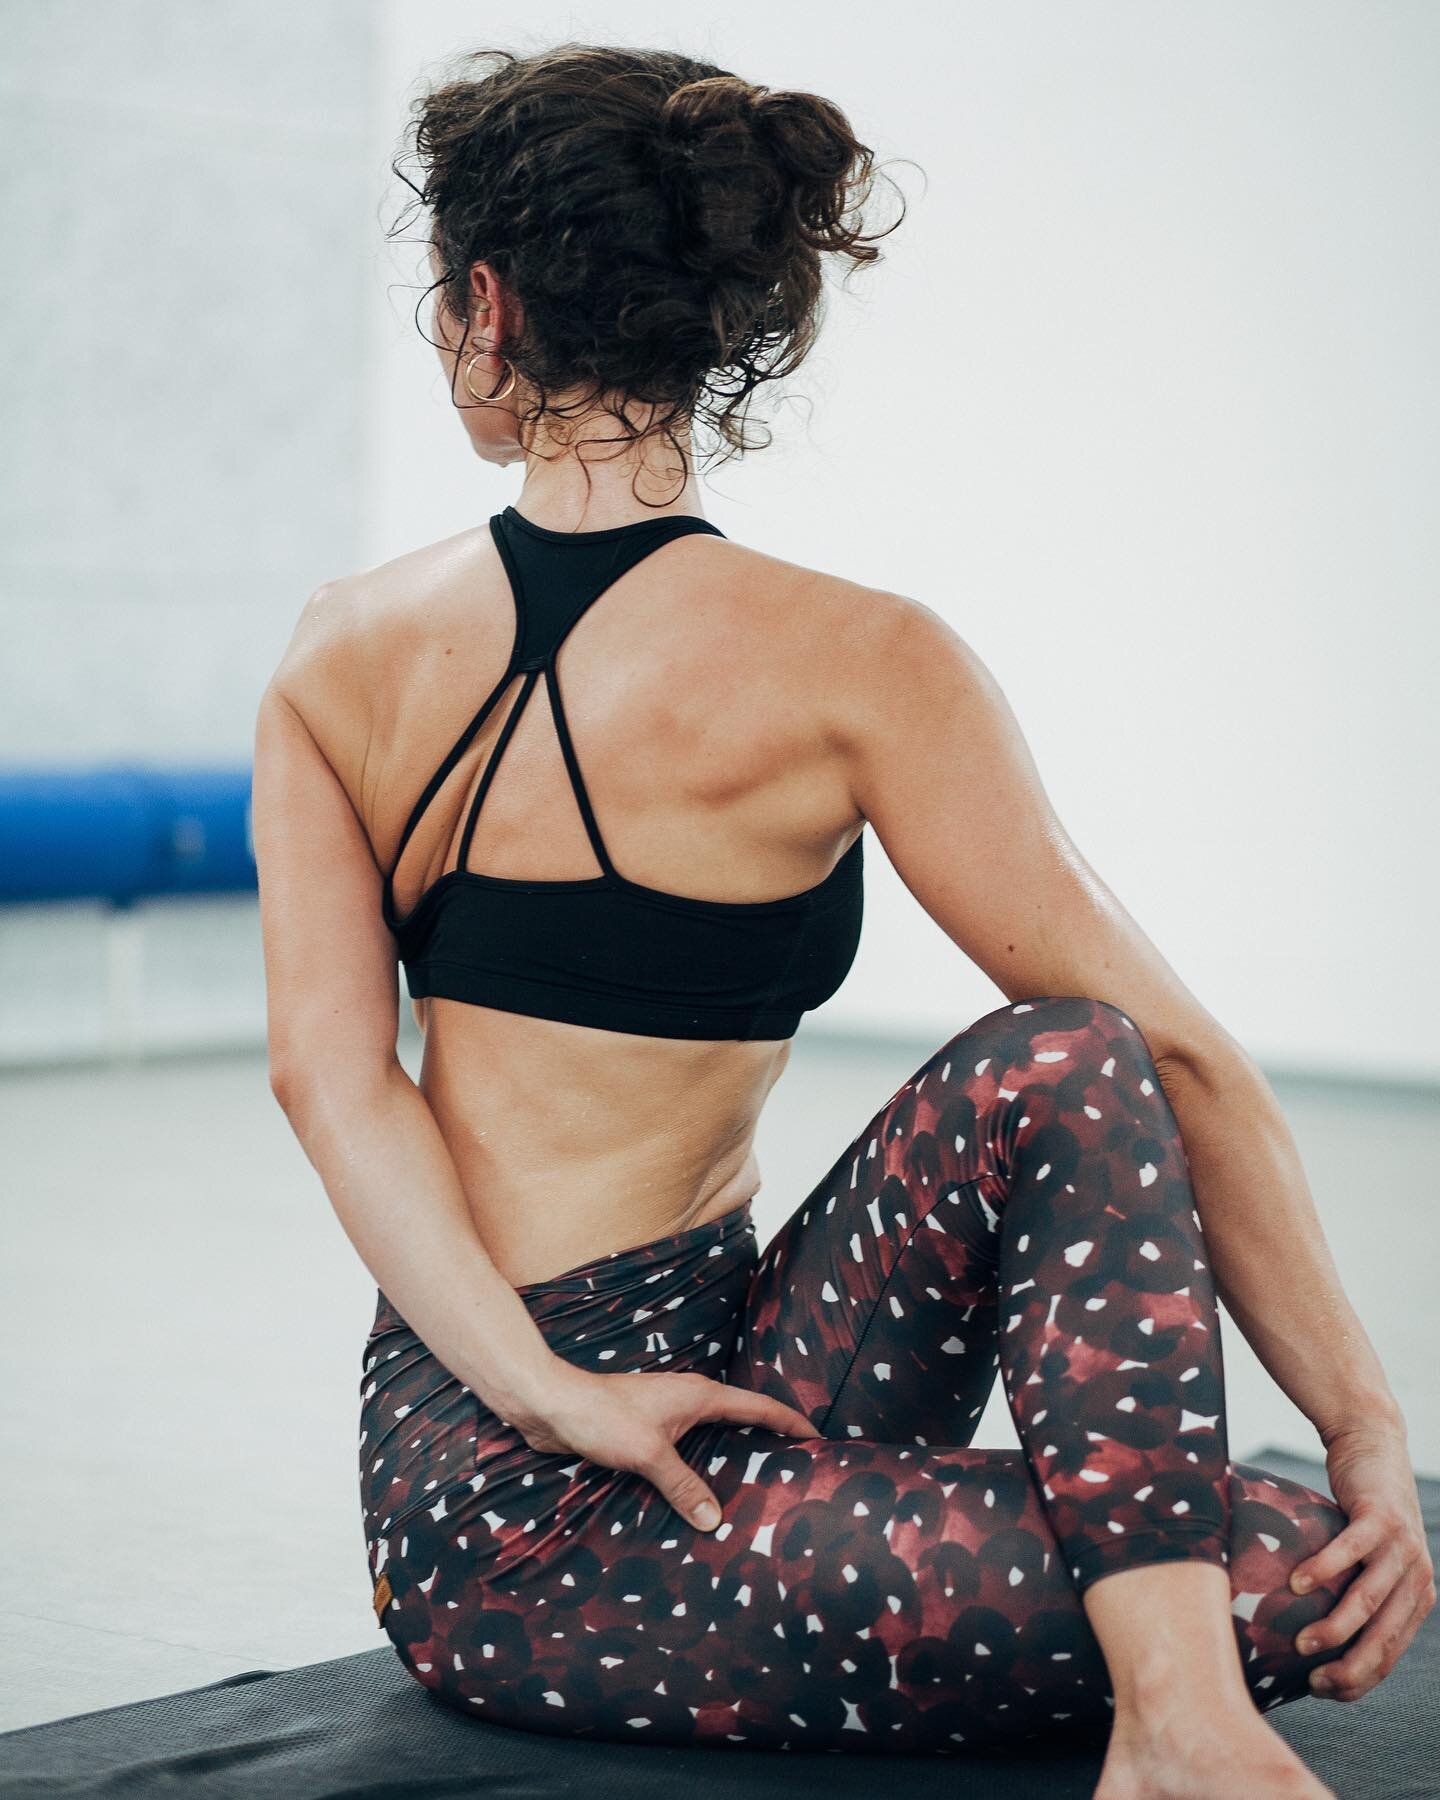 We hope you had a wonderful weekend and Labour Day!

Interesting facts about Spine Twisting Pose:

⚡️Ardha Matsyendrasana is named after the Indian yogi and sage, Matsyendra Nath, and is a powerful twisting posture that helps to improve spinal mobili